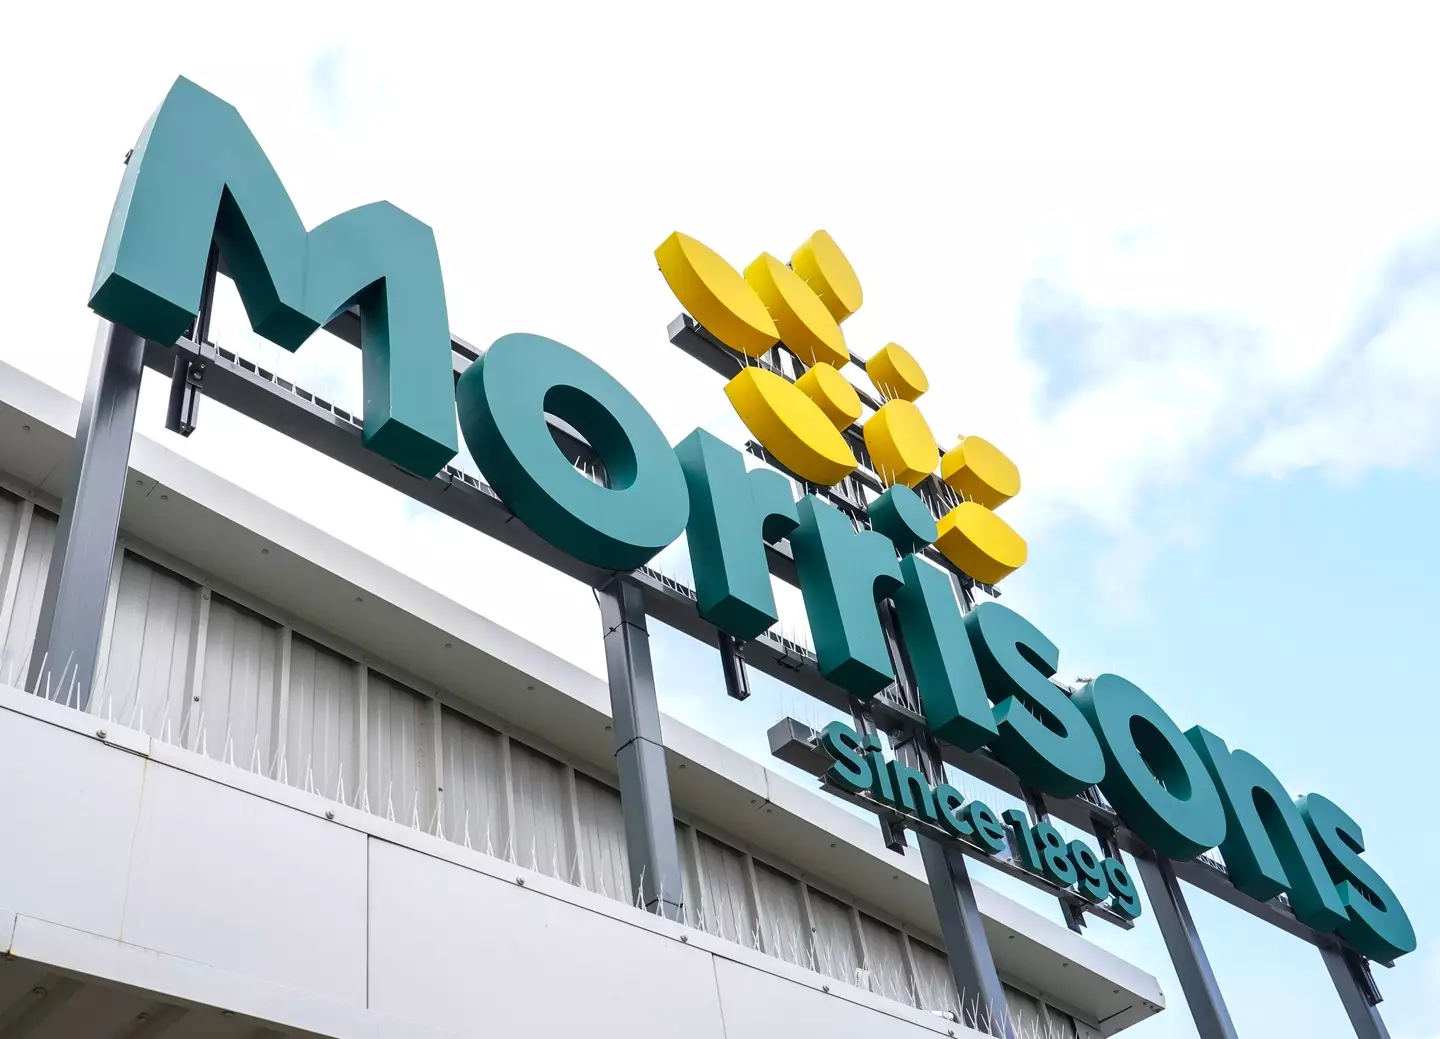 Morrisons has launched a 'formal investigation' into the matter.